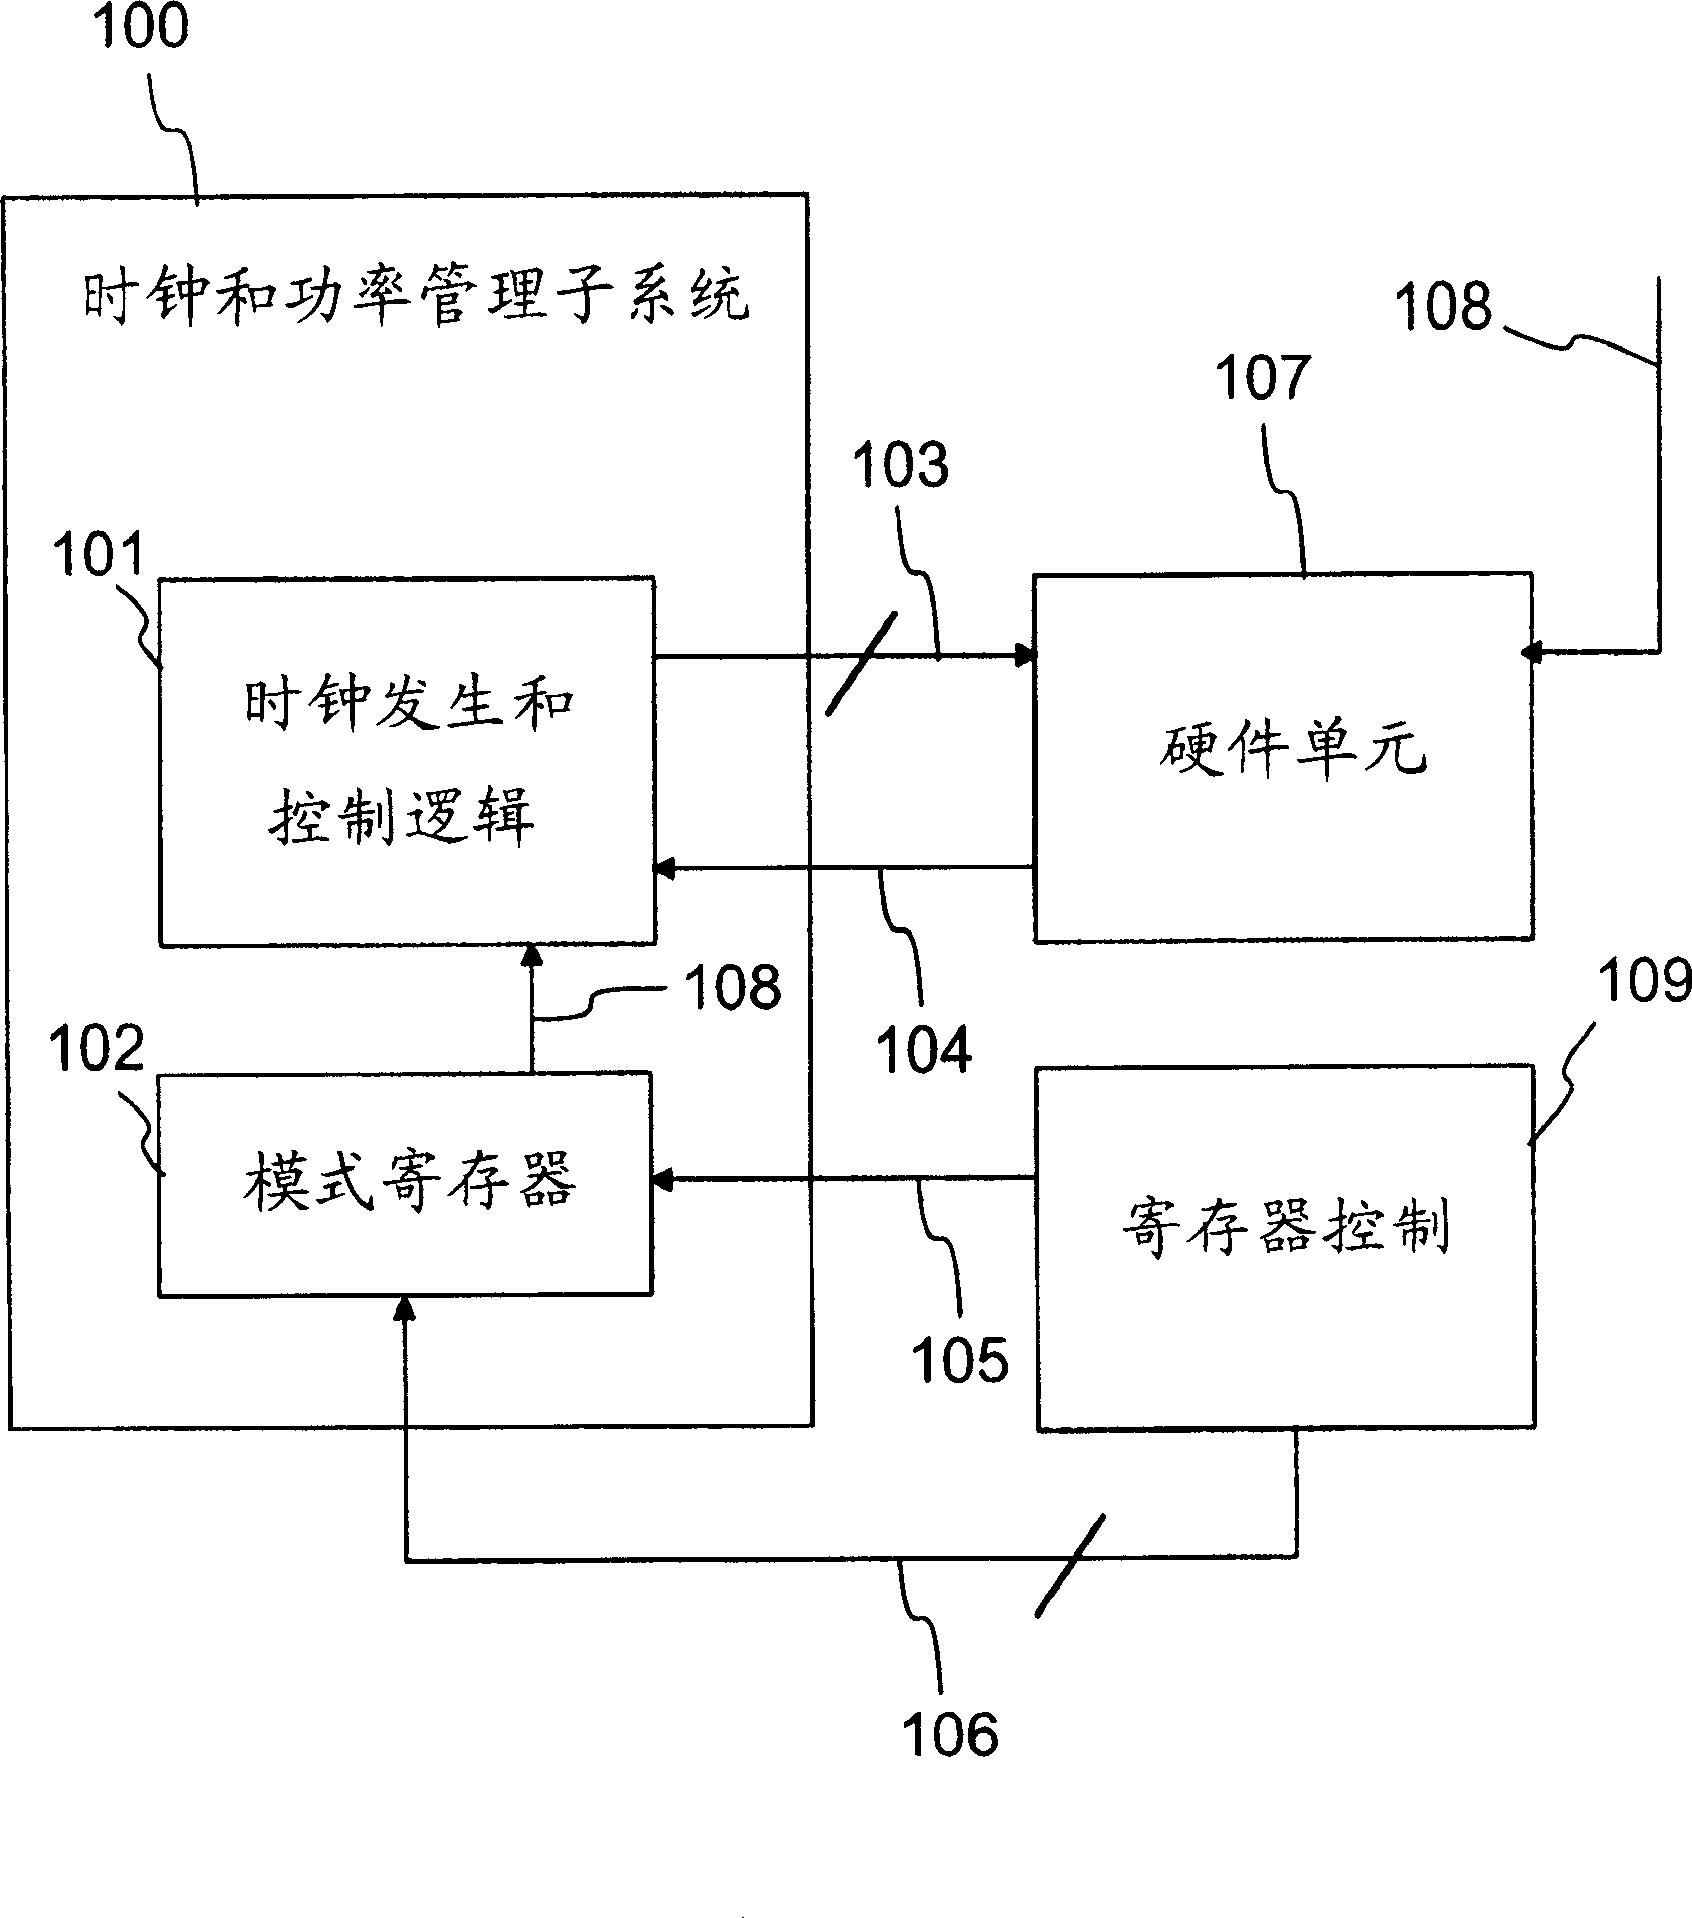 Dynamic power control in integrated circuit